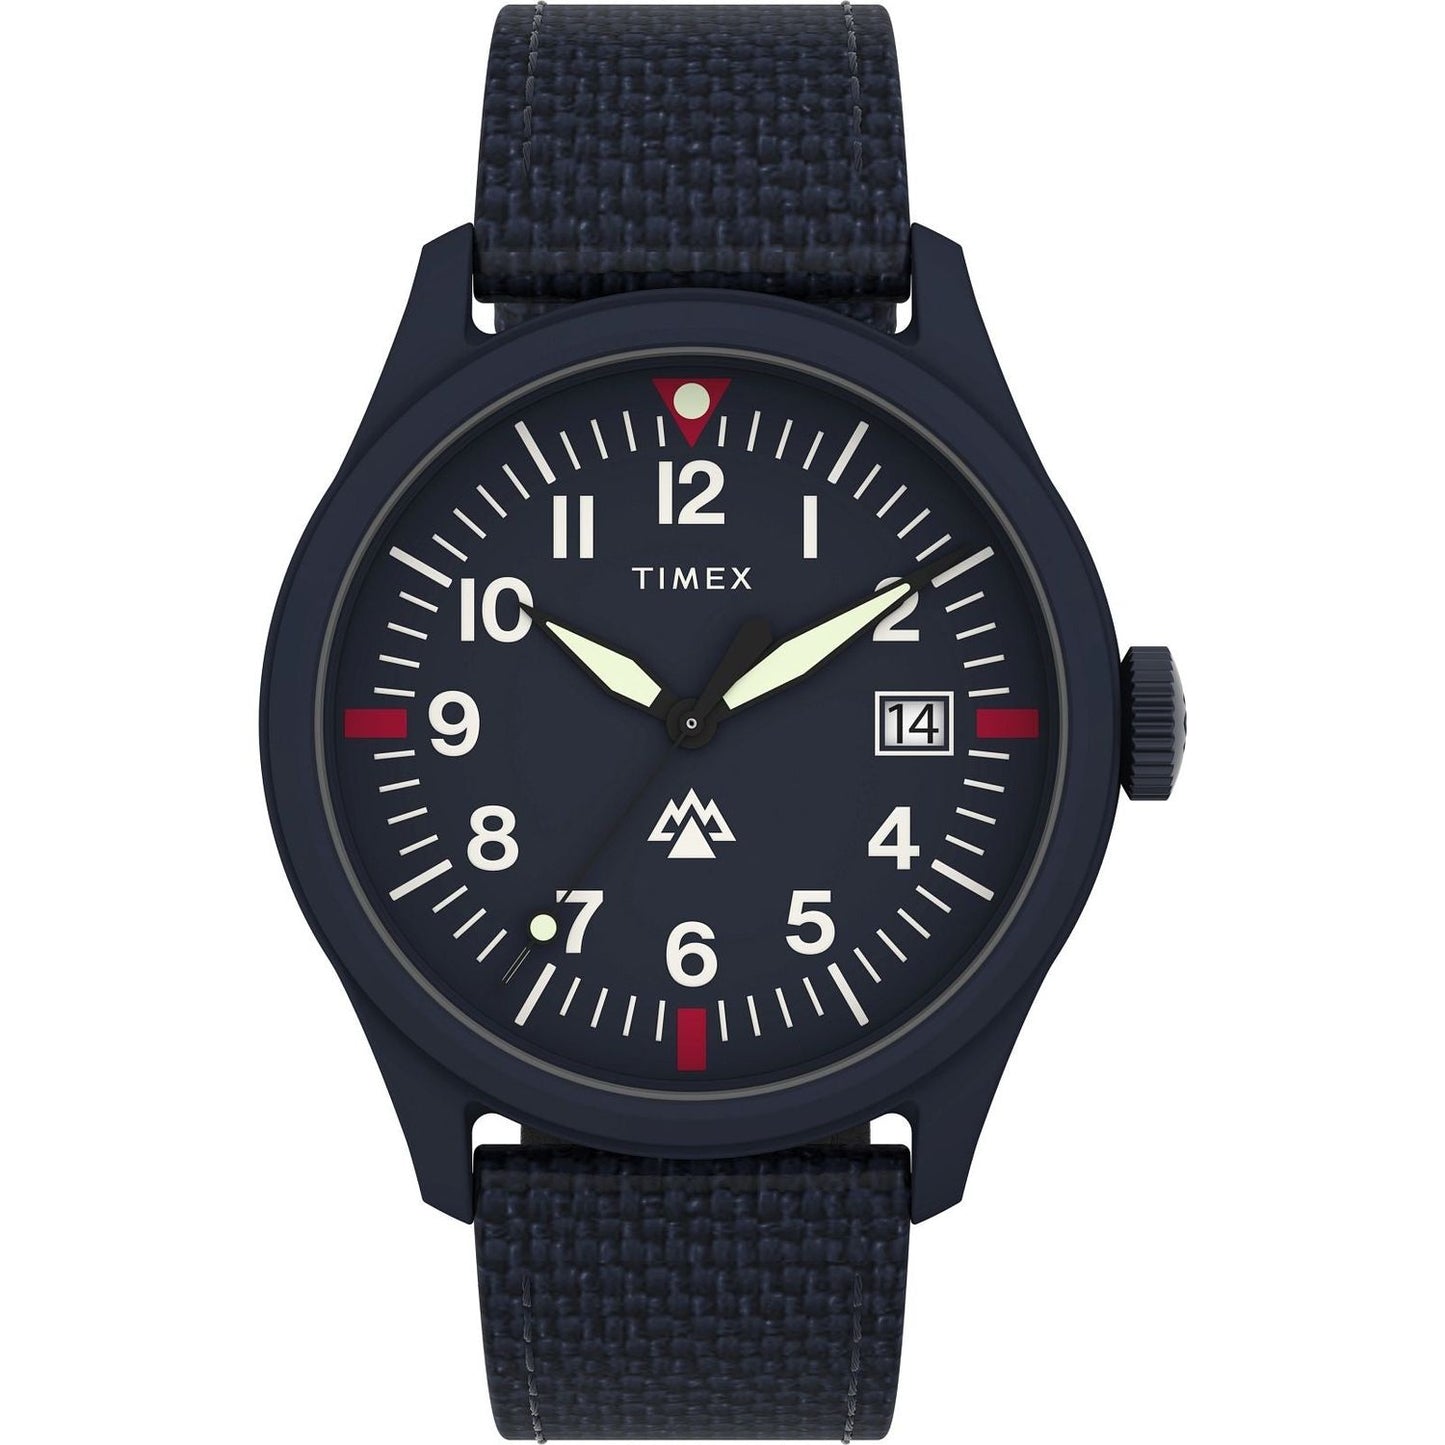 TIMEX TIMEX Mod. EXPEDITION TRAPROCK WATCHES timex-mod-expedition-traprock